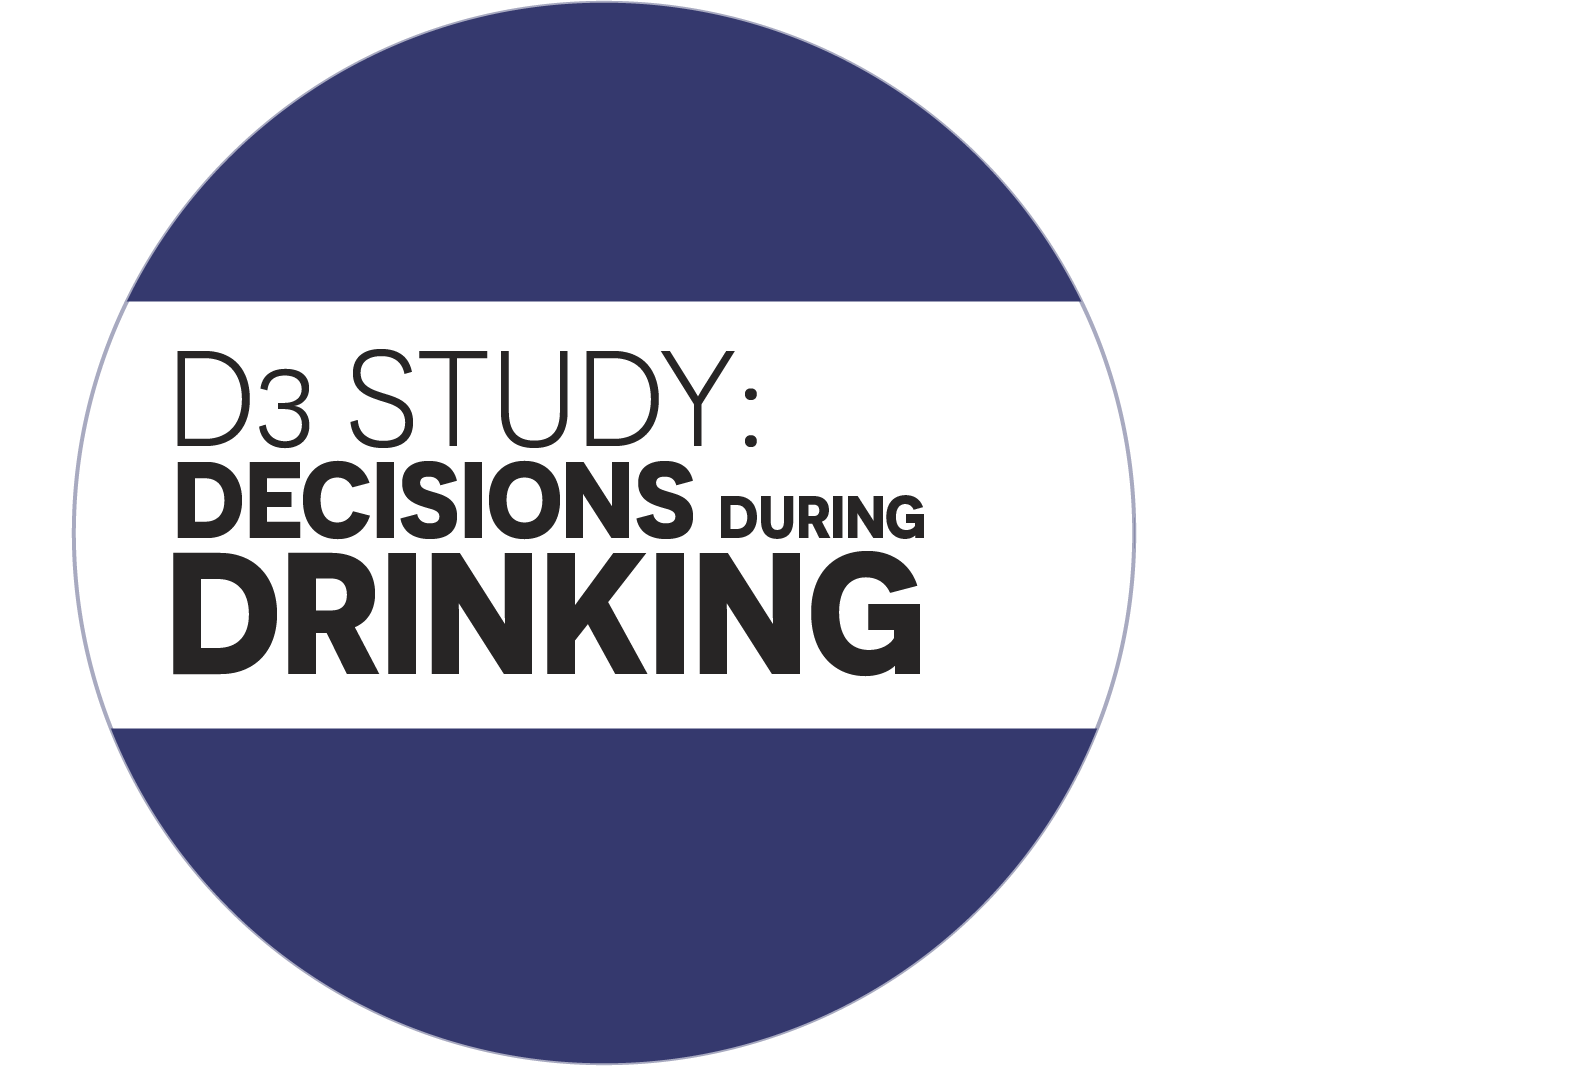 D3 Study: Decisions During Drinking